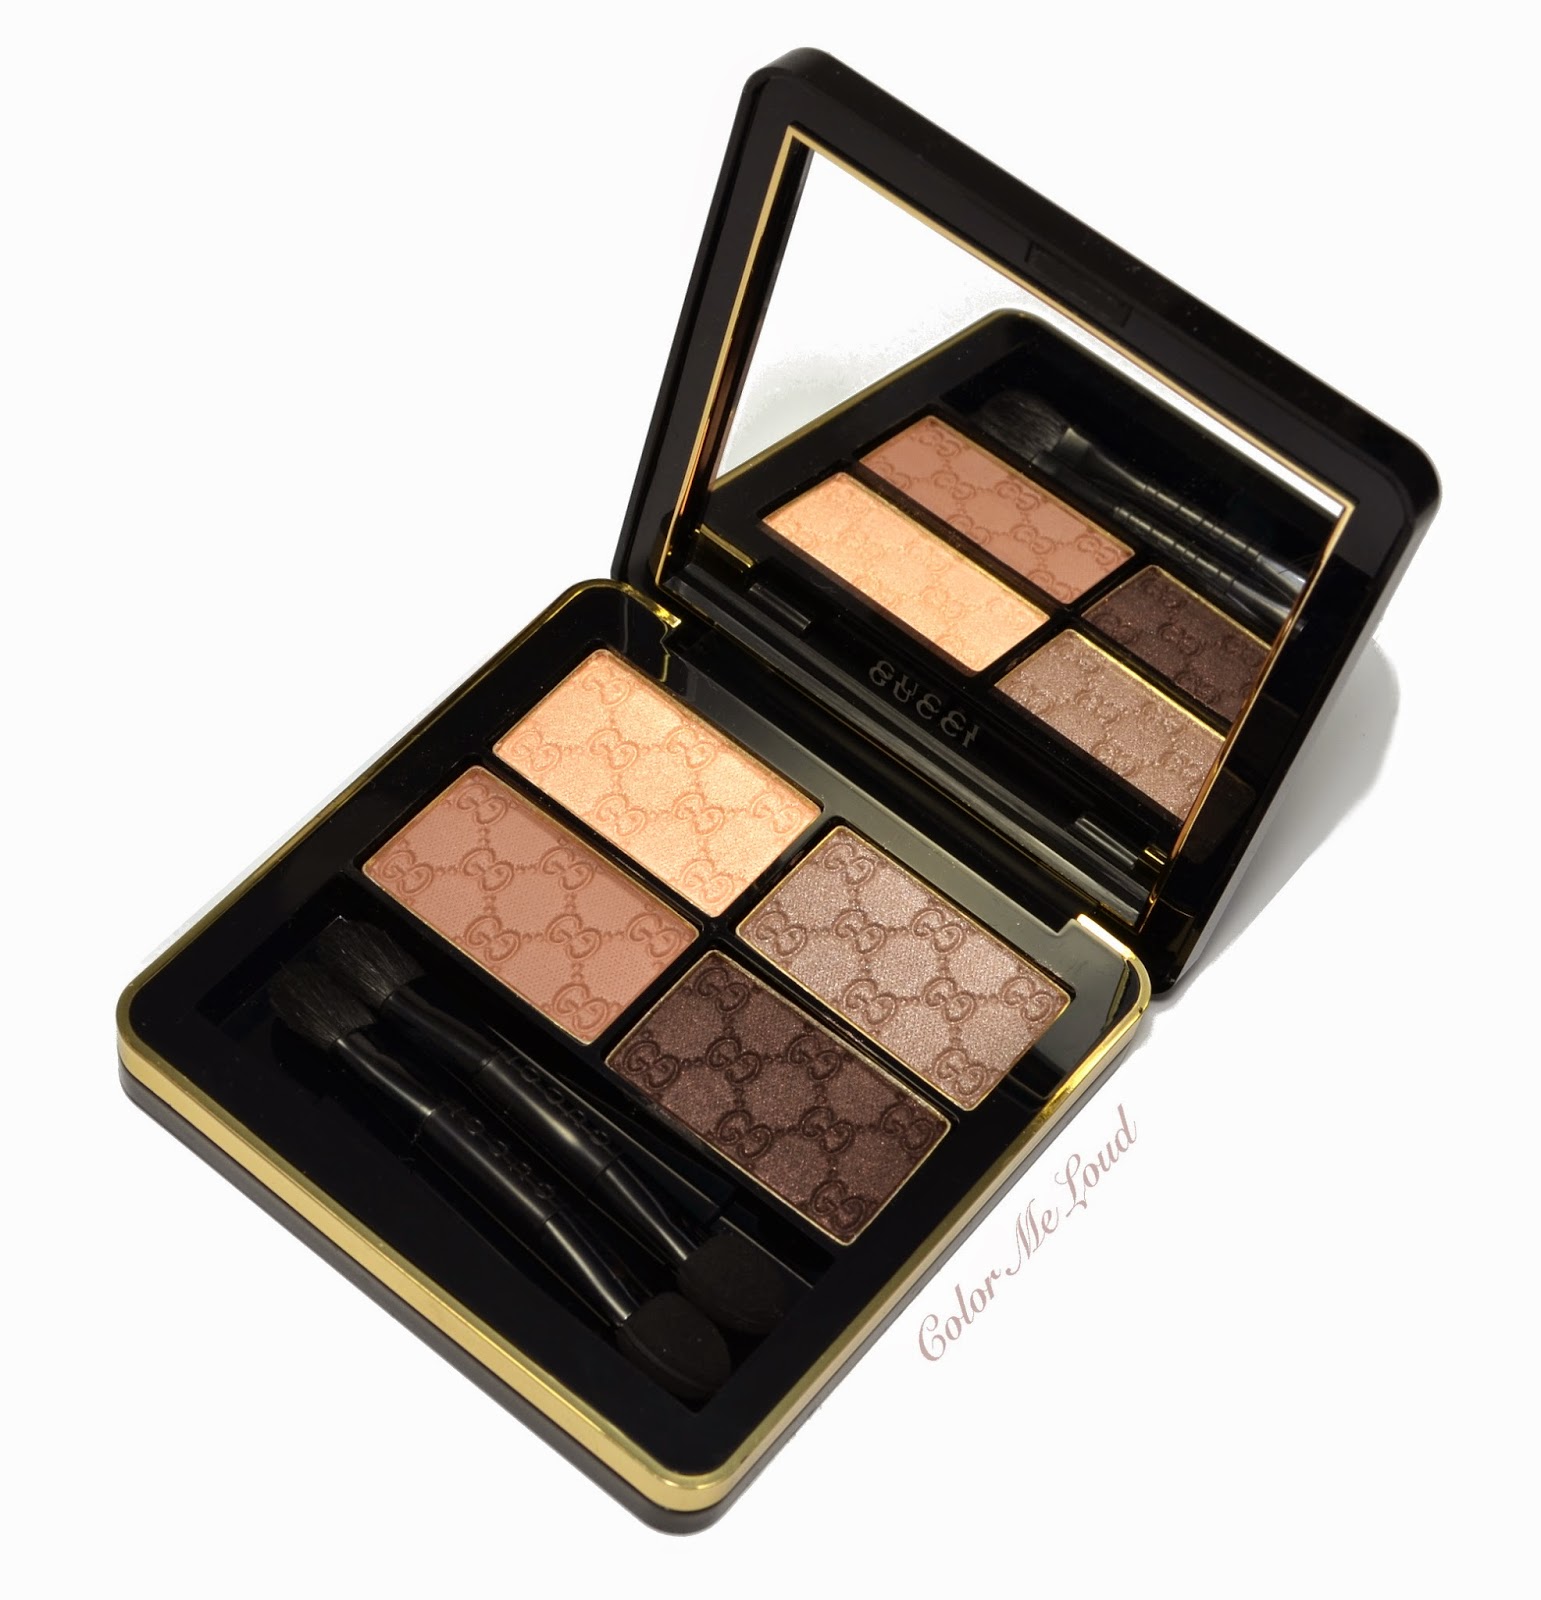 Gucci Magnetic Color Shadow Quad #020 Tuscan Storm for Fall 2014